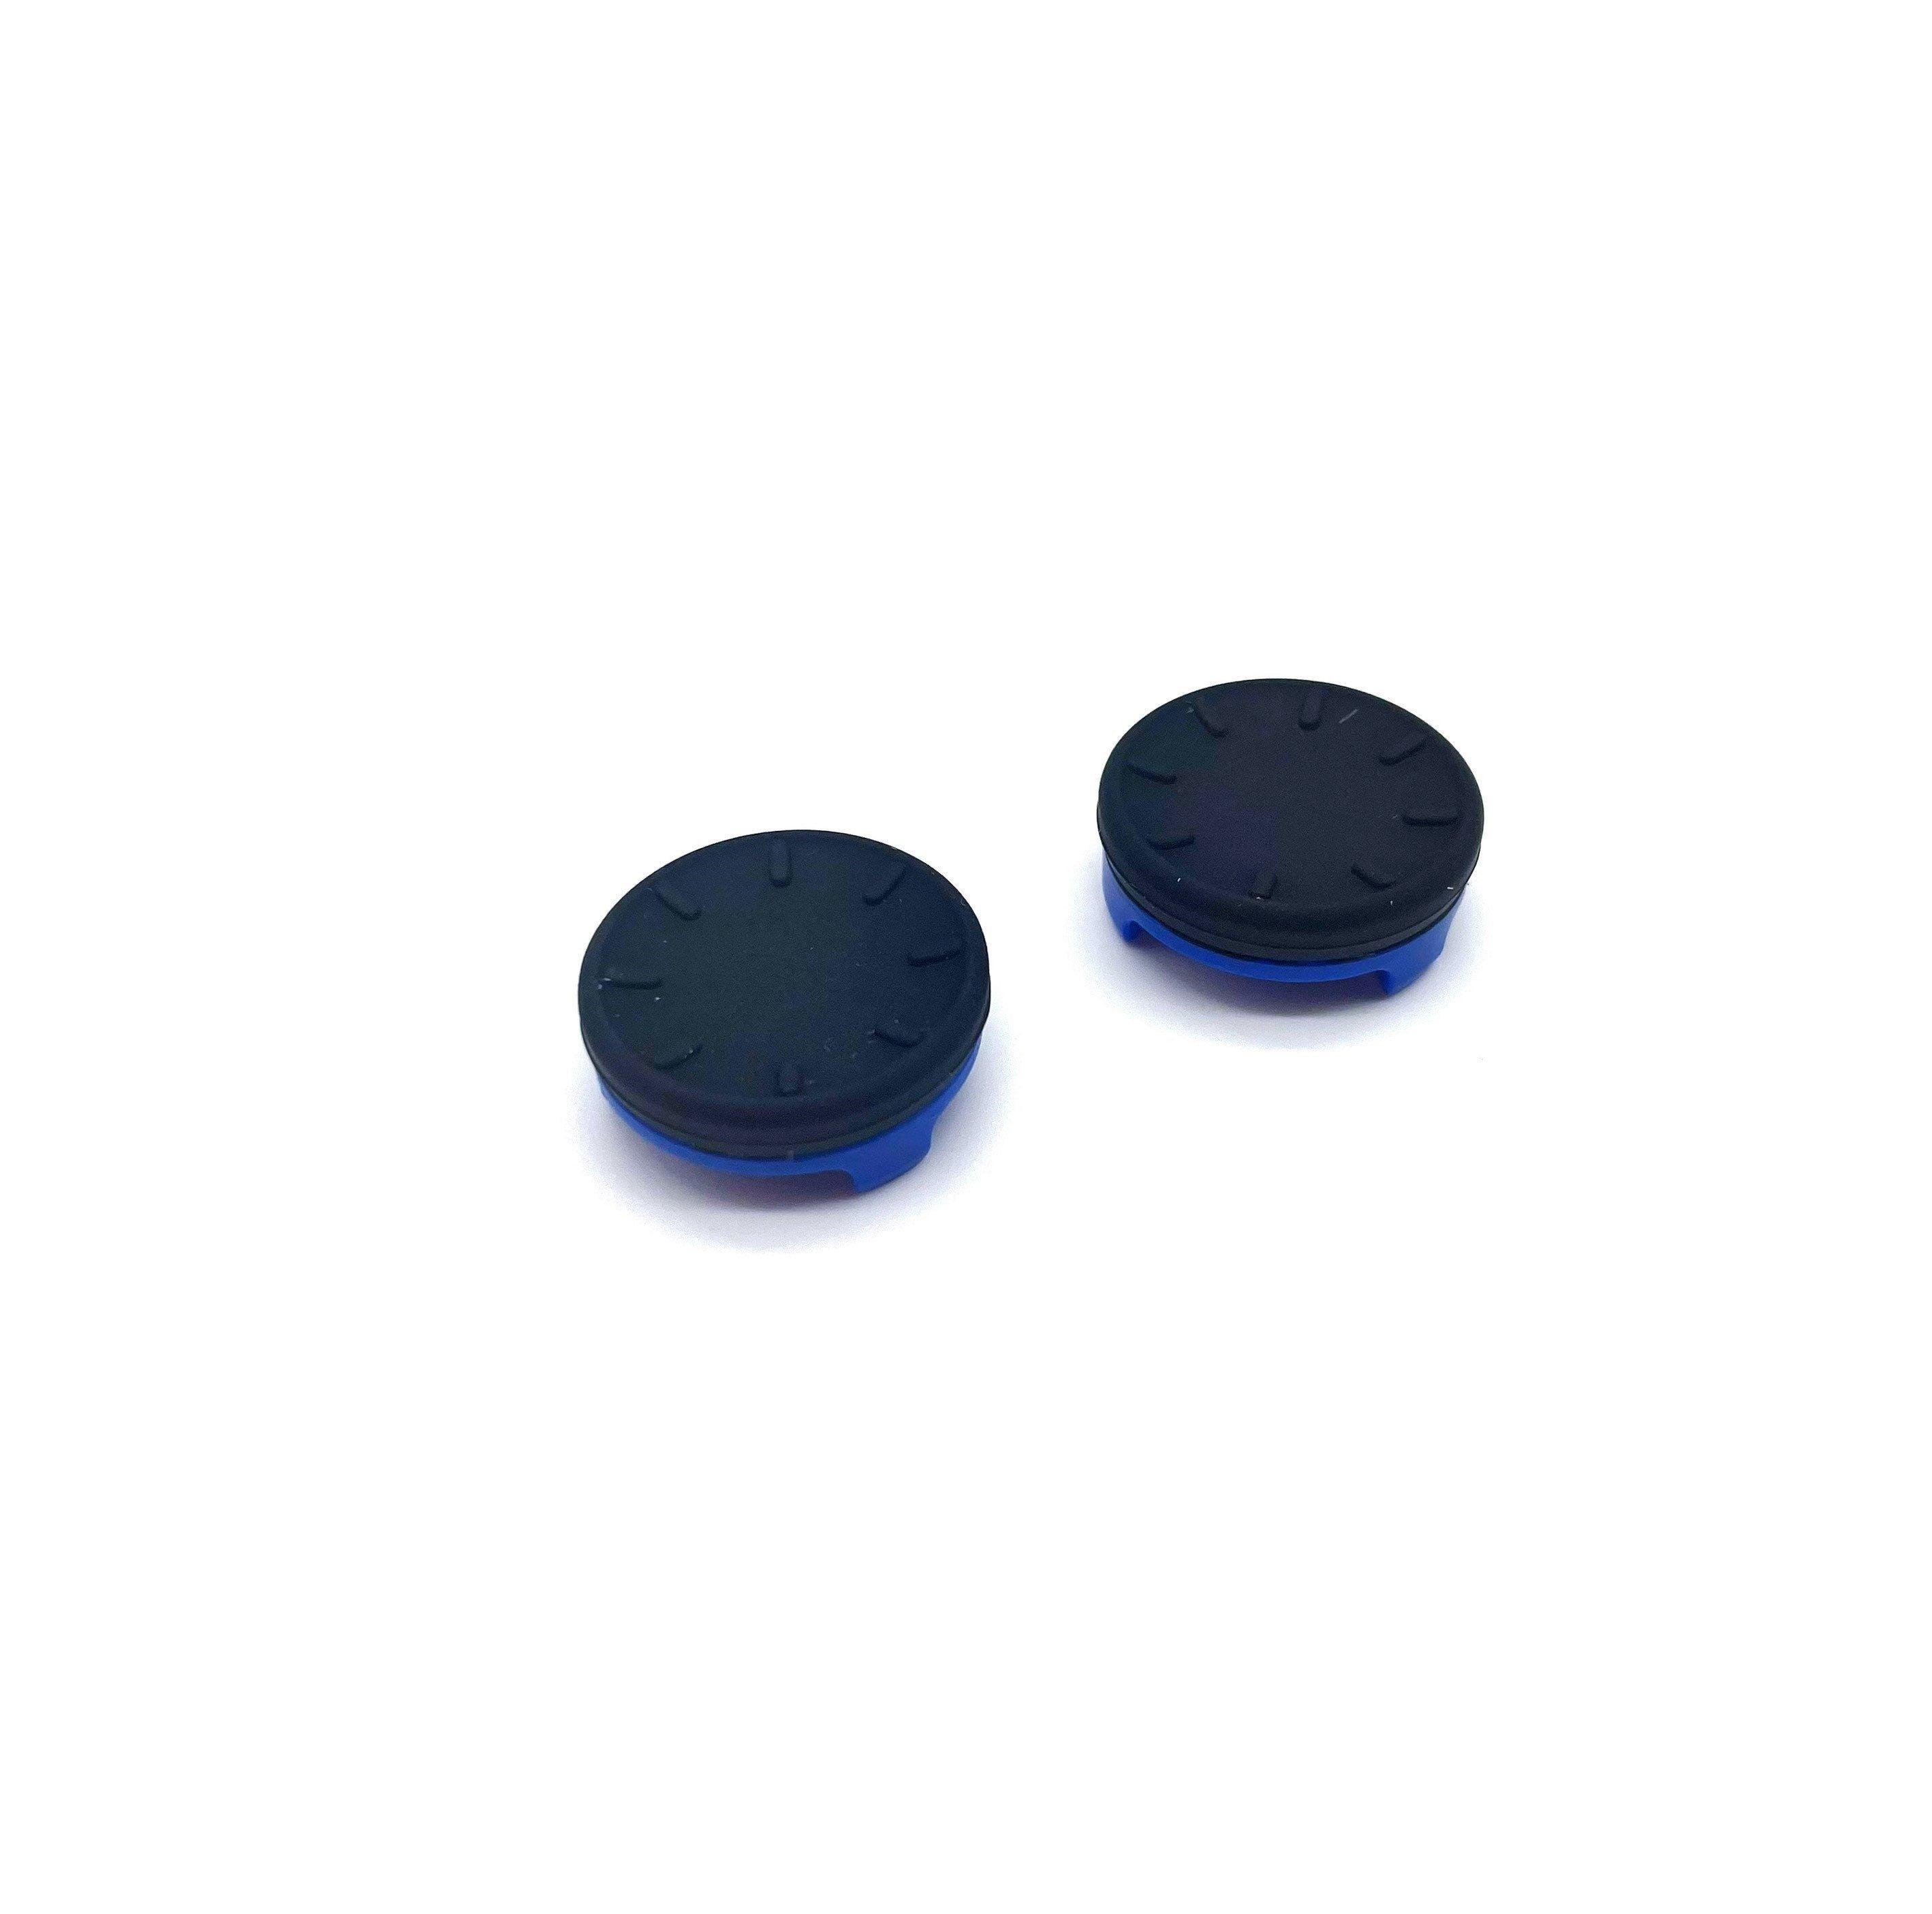 Atrix Short Thumb Grips for PlayStation 5 and PlayStation 4 GameStop Exclusive